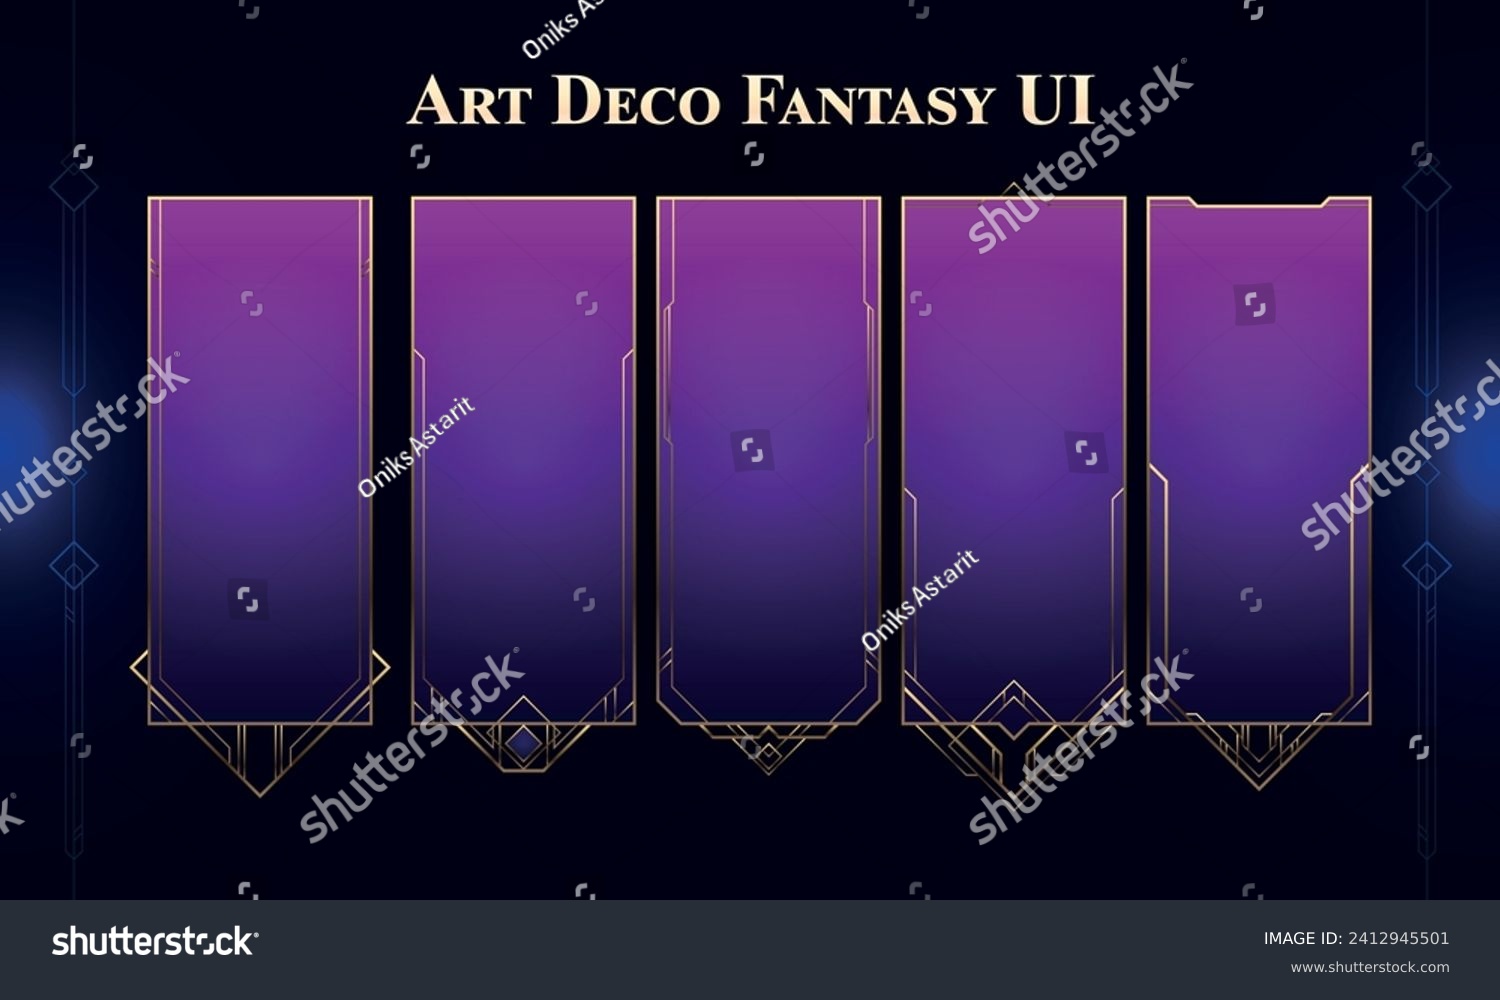 SVG of Set of Art Deco Modern Banners for user interface. Fantasy magic HUD with rewards. Template for rpg game interface. Vector Illustration EPS10 svg